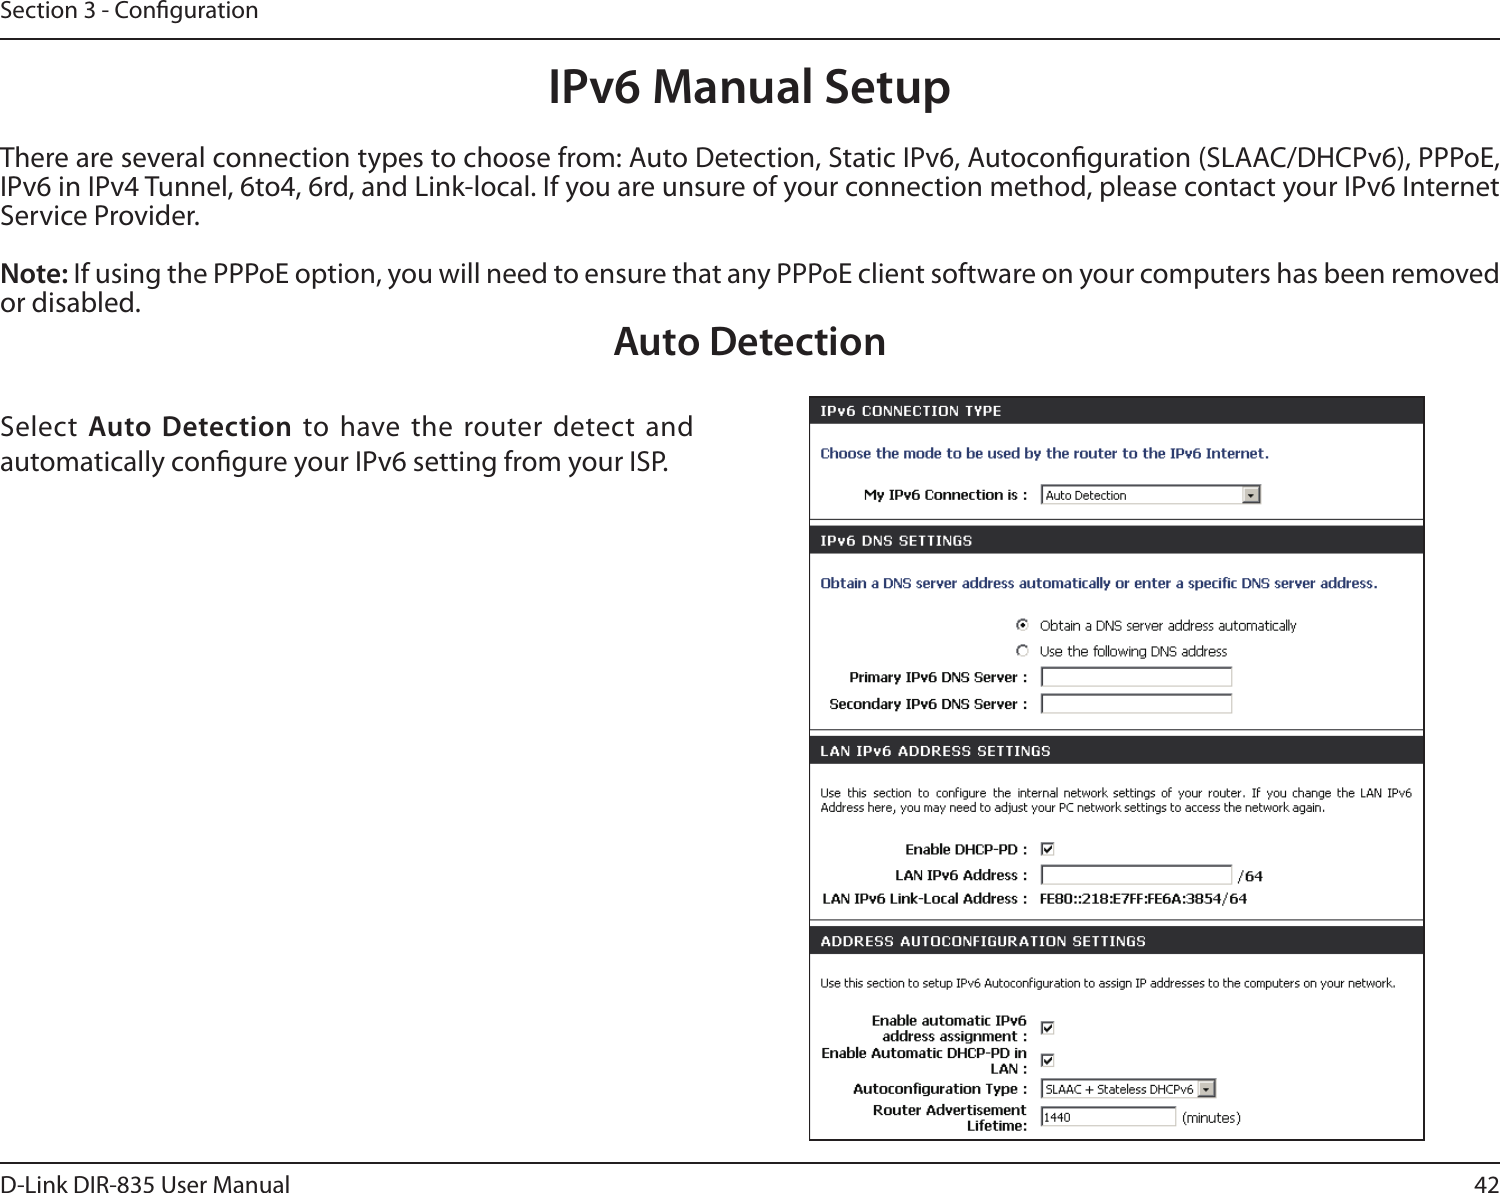 42D-Link DIR-835 User ManualSection 3 - CongurationIPv6 Manual SetupThere are several connection types to choose from: Auto Detection, Static IPv6, Autoconguration (SLAAC/DHCPv6), PPPoE, IPv6 in IPv4 Tunnel, 6to4, 6rd, and Link-local. If you are unsure of your connection method, please contact your IPv6 Internet Service Provider. Note: If using the PPPoE option, you will need to ensure that any PPPoE client software on your computers has been removed or disabled.Auto DetectionSelect Auto Detection to have the  router detect  and automatically congure your IPv6 setting from your ISP.